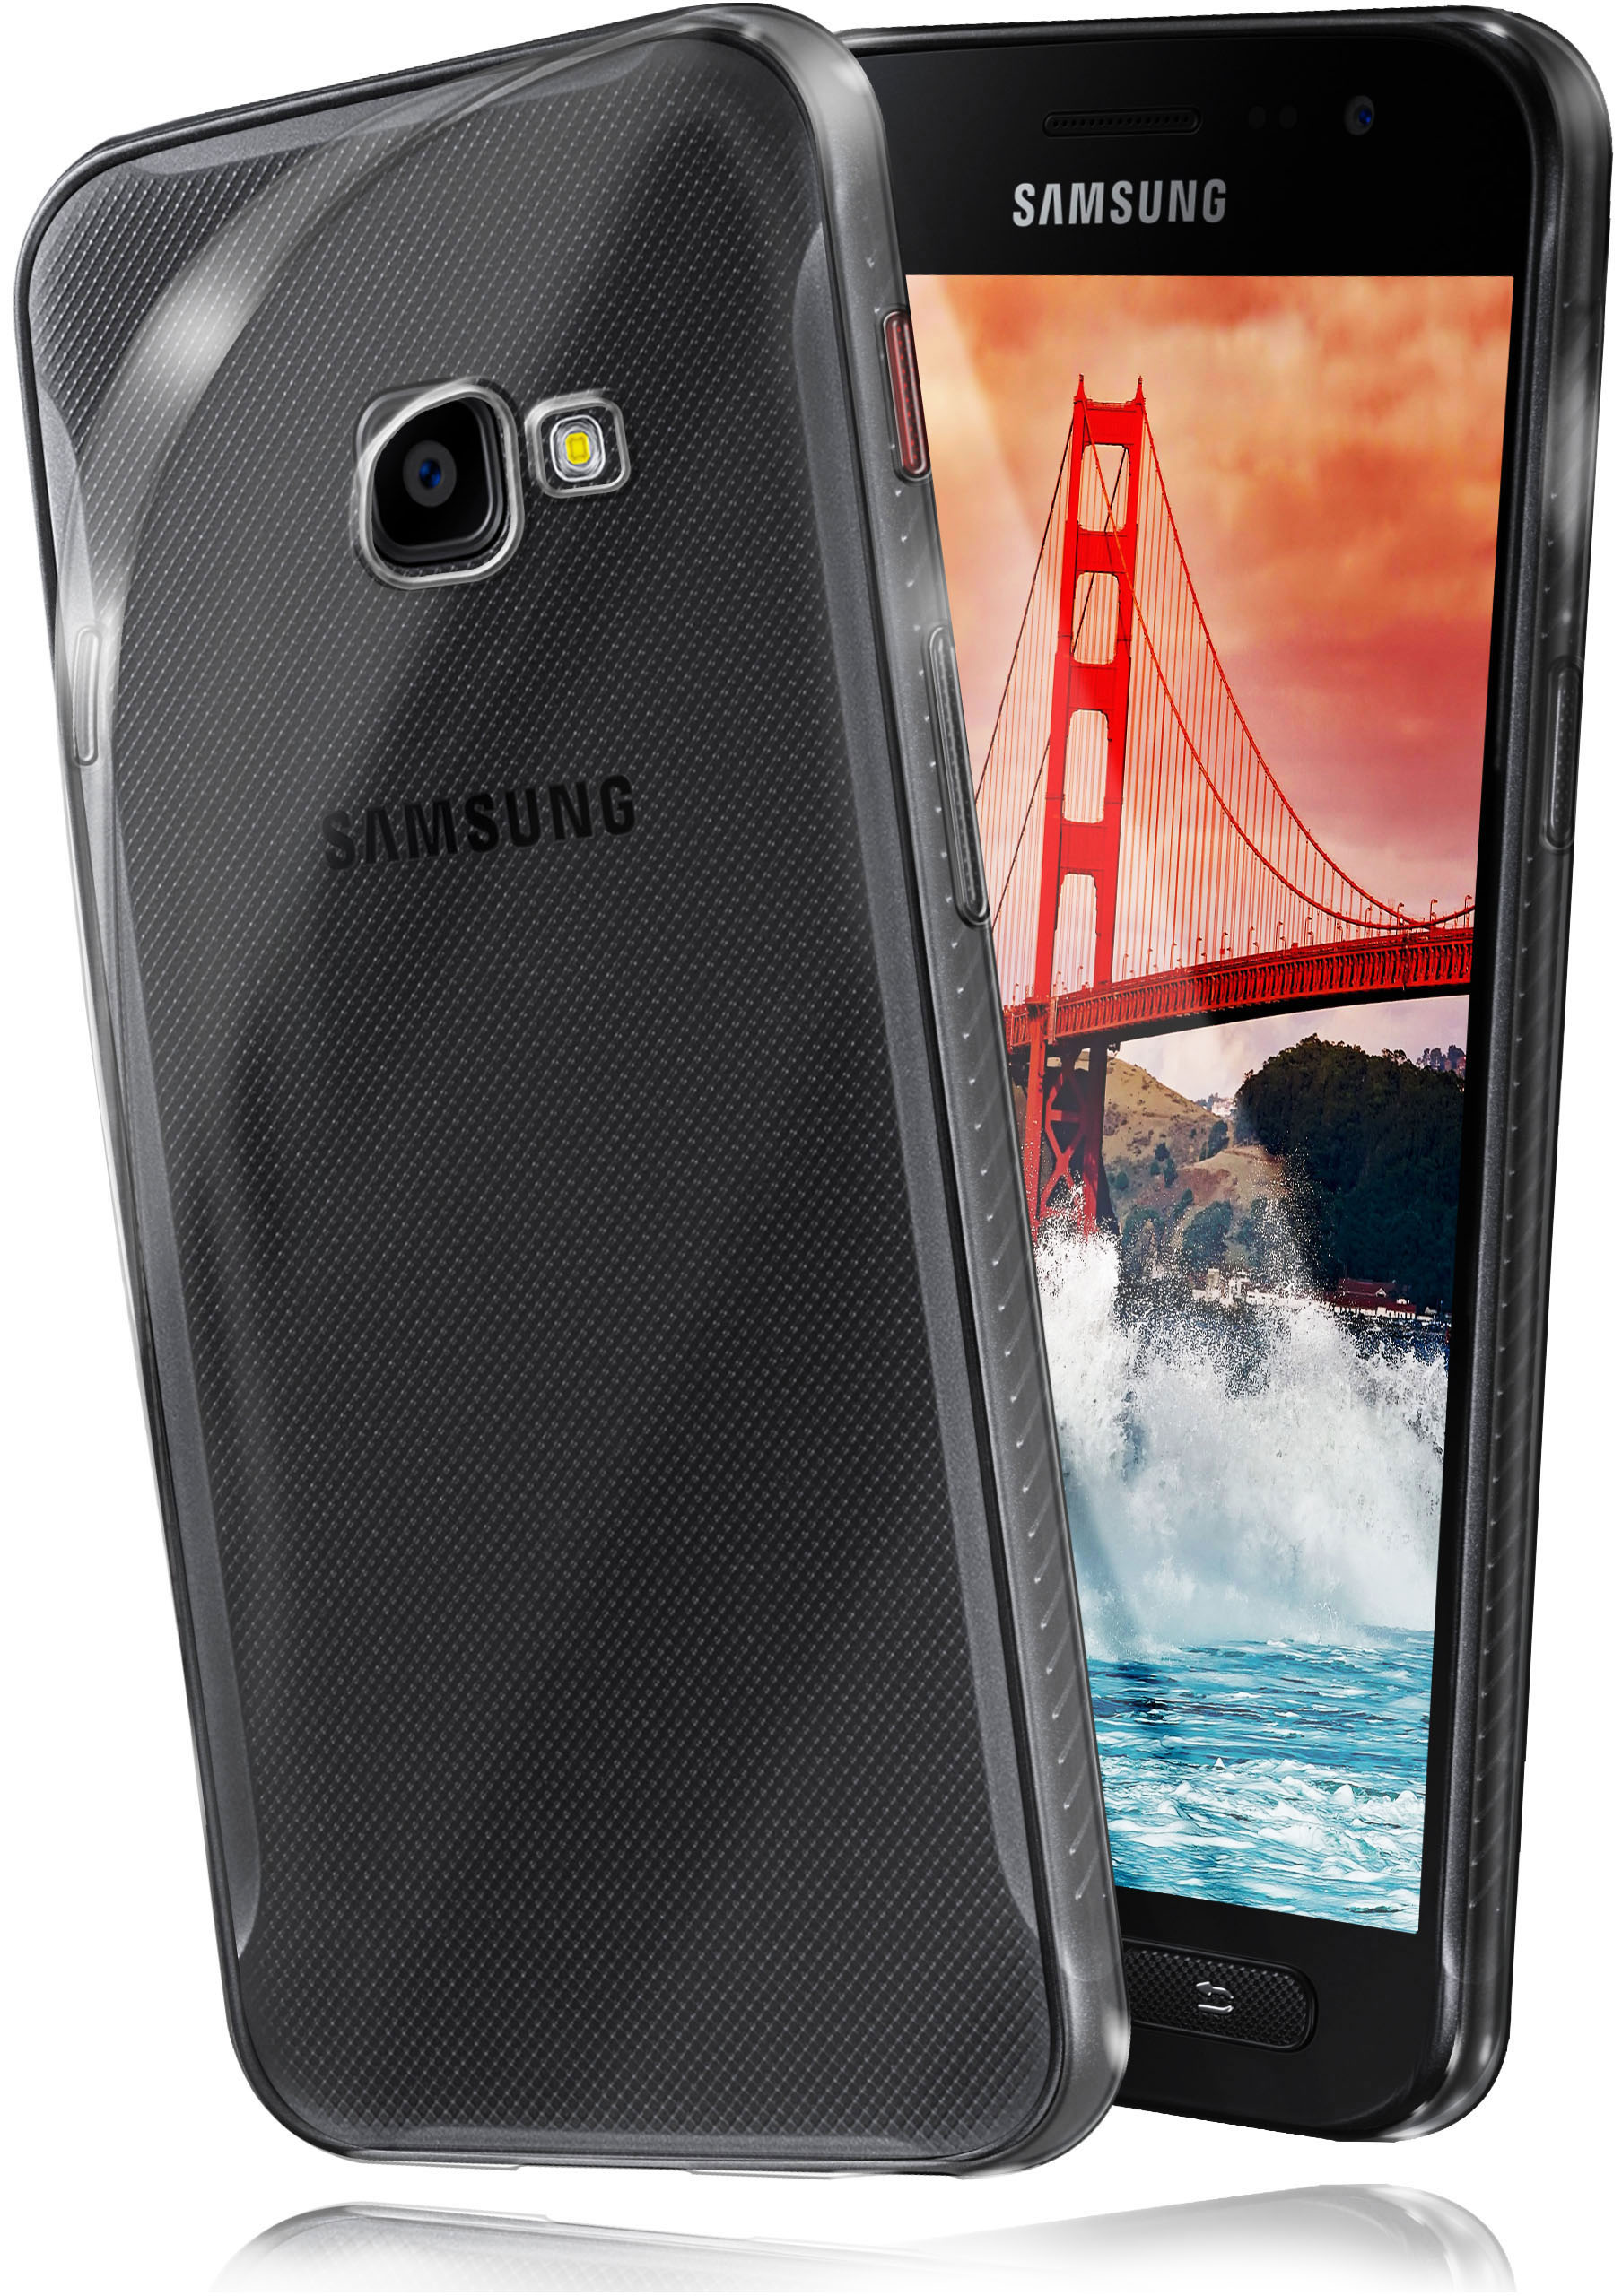 Aero MOEX Crystal-Clear Xcover Samsung, Case, Backcover, Galaxy 4s,